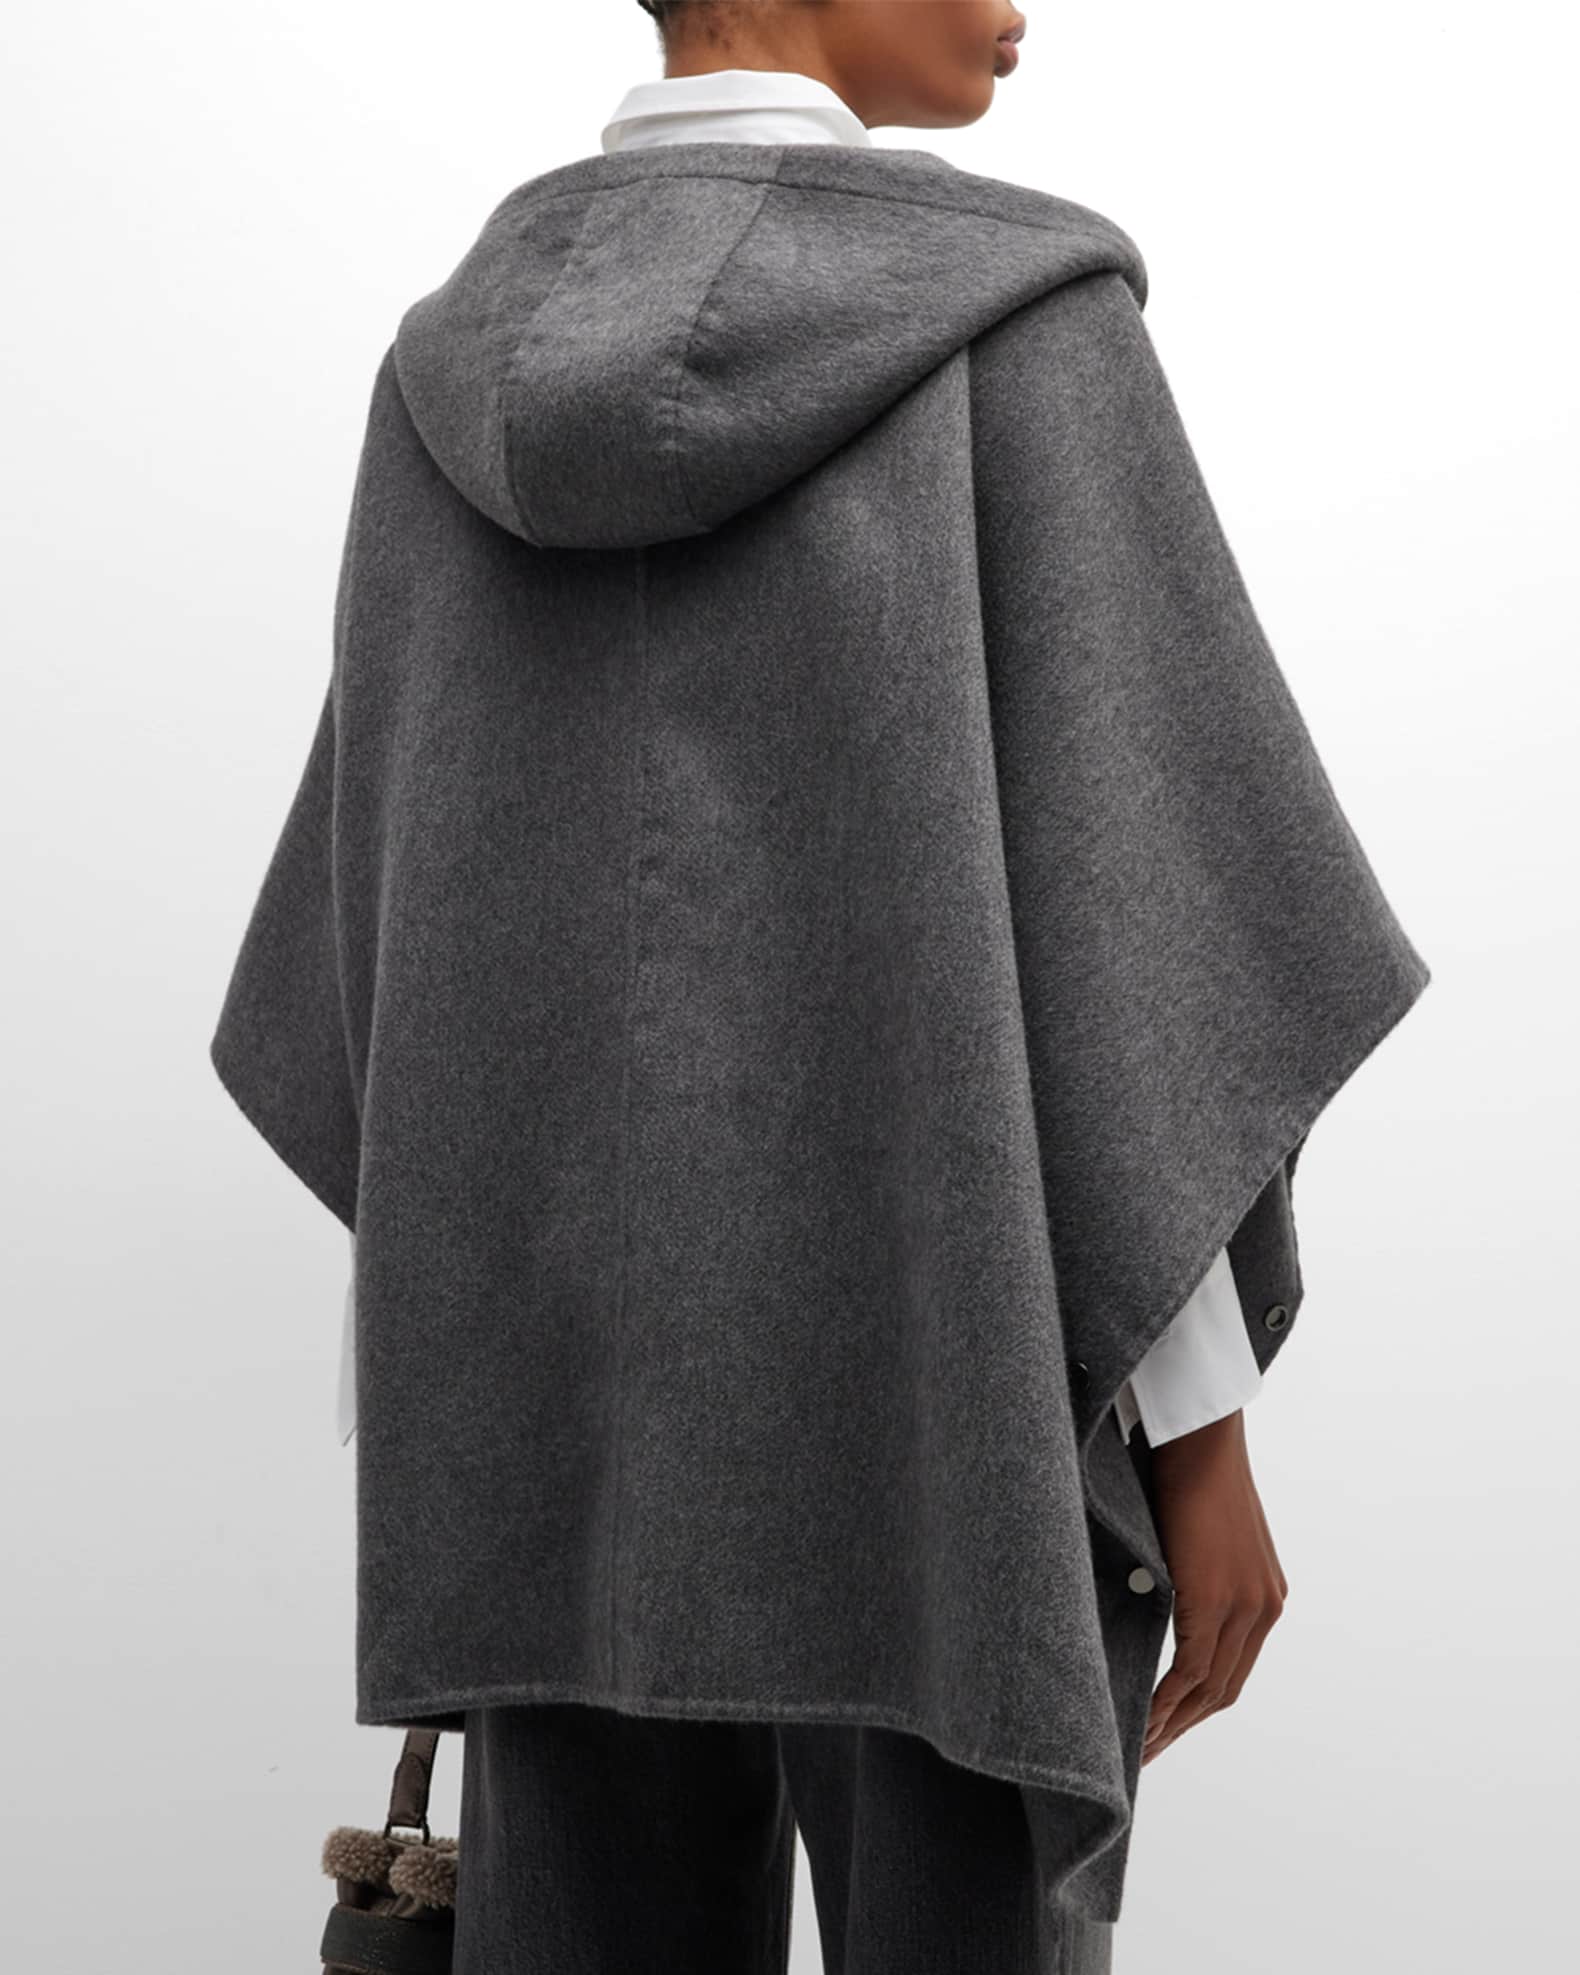 LOUIS VUITTON knit Hooded poncho Cashmere gray